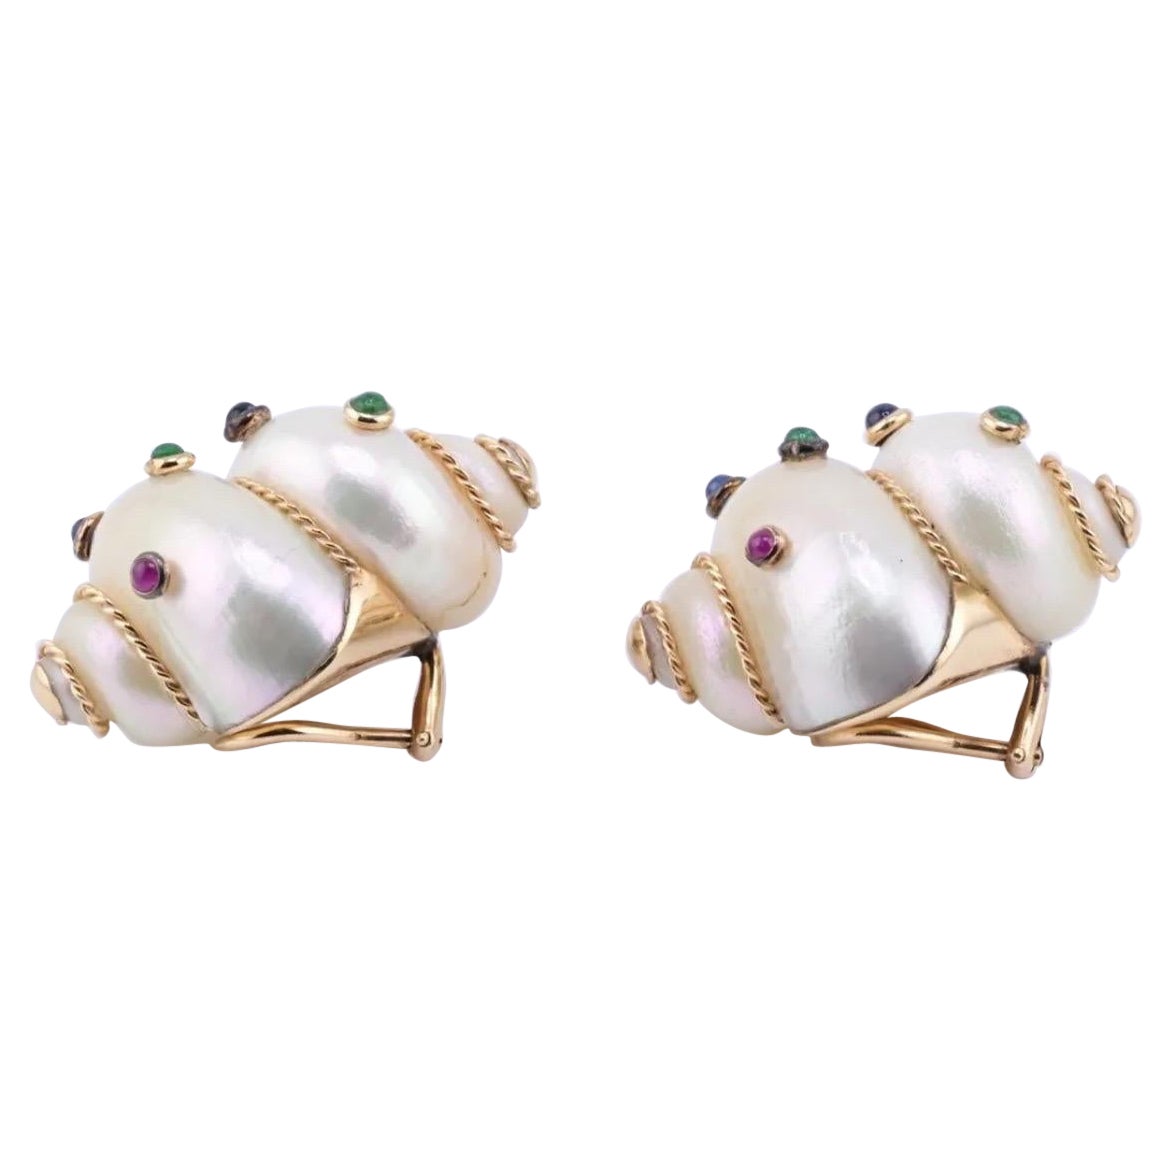 Gorgeous Pair Of 14K Maz Seashell Earrings With Gemstones Seaman Schepps Style For Sale